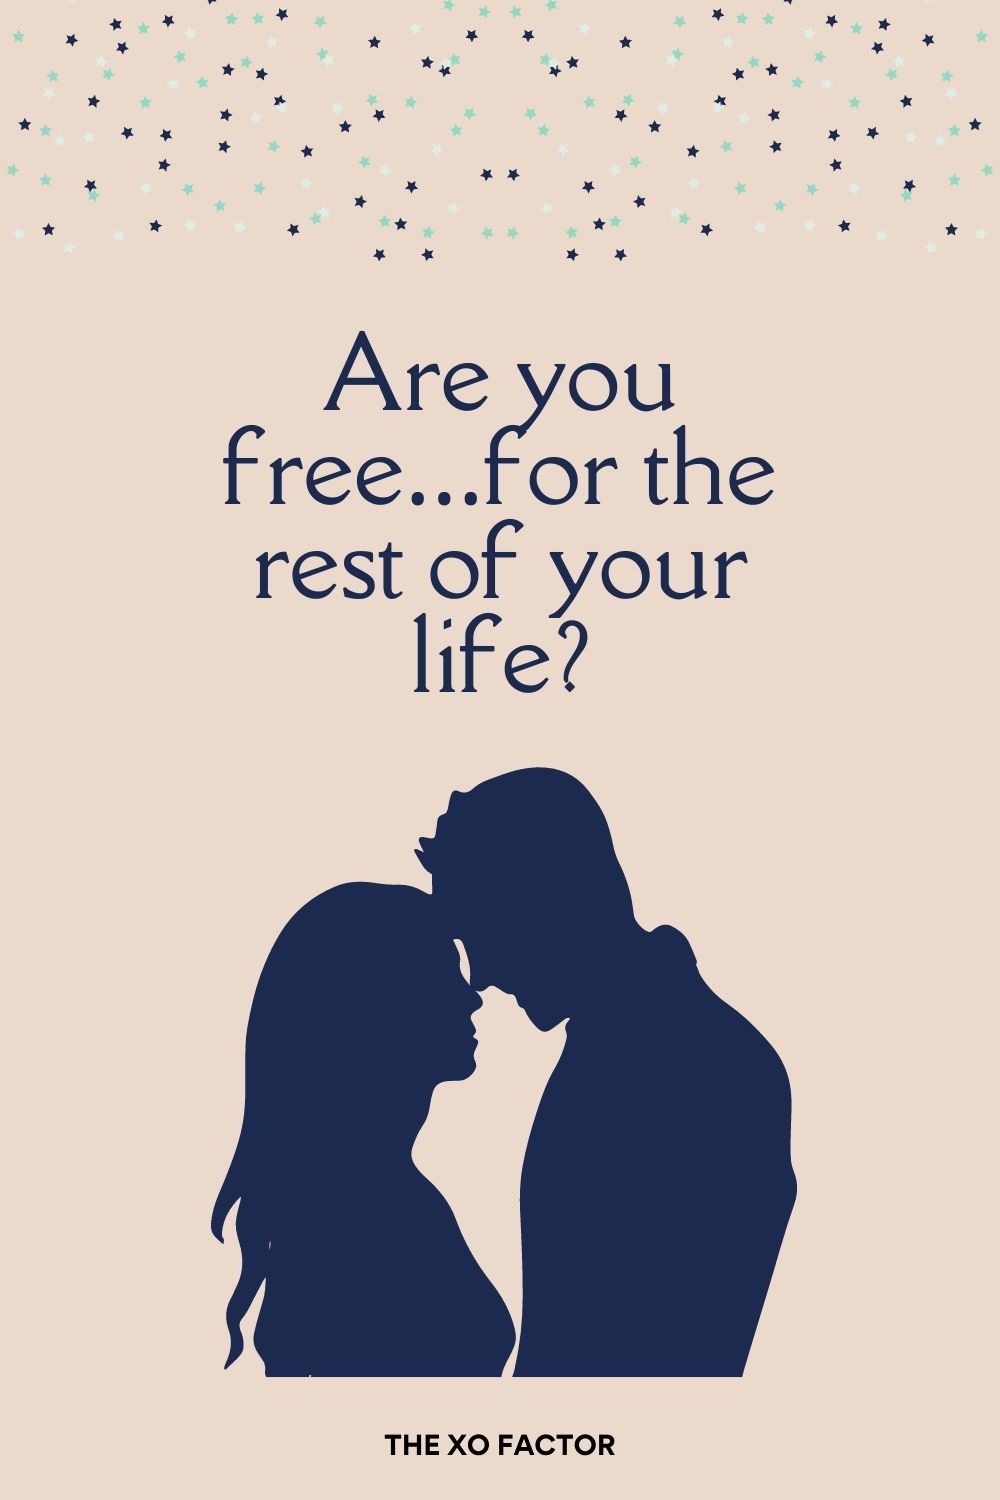 Are you free…for the rest of your life?